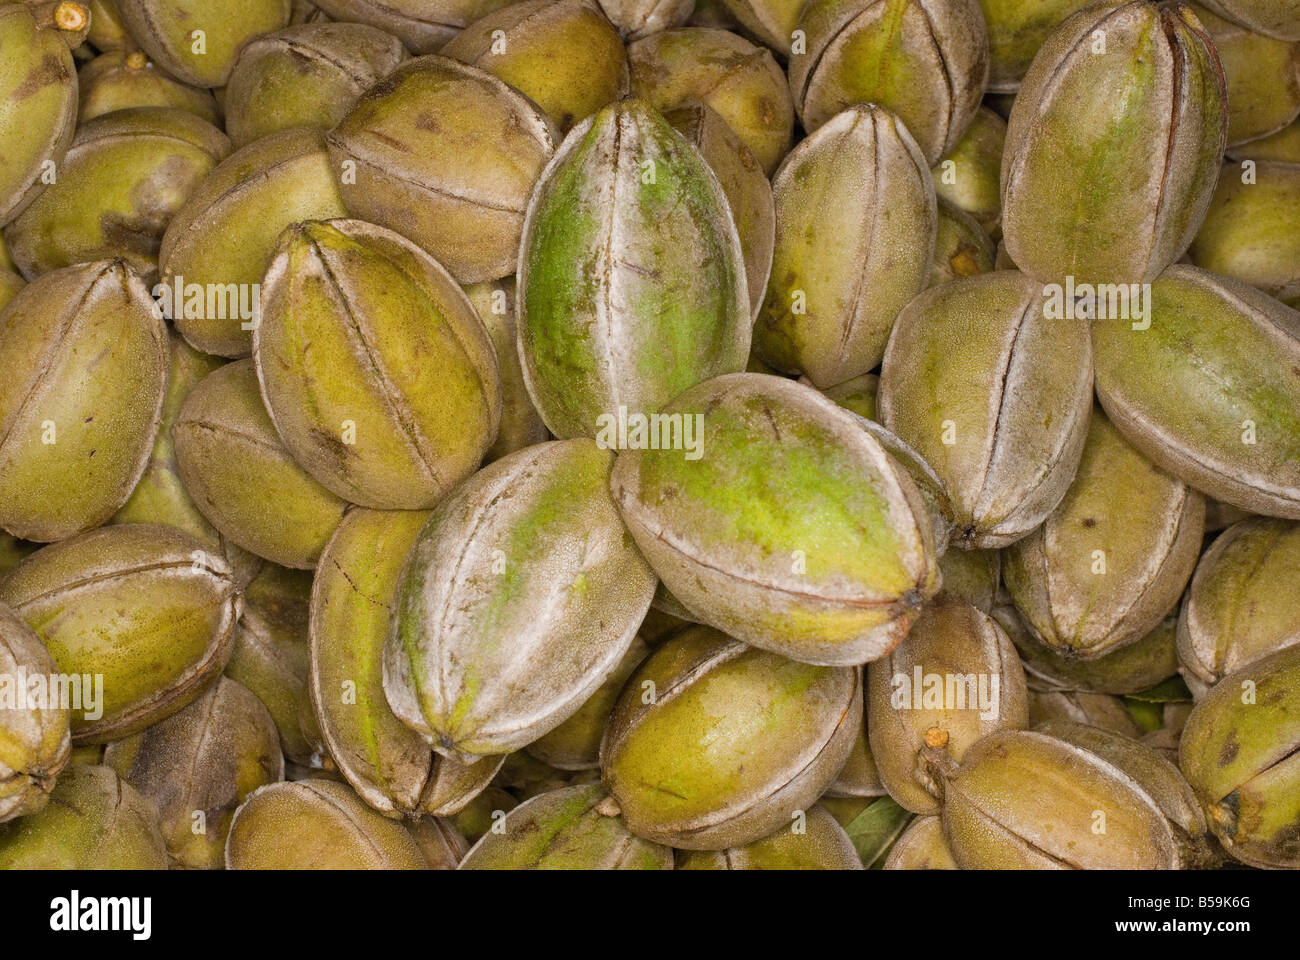 The pecan Carya illinoinensis or illinoensis is a species of hickory tree. Stock Photo